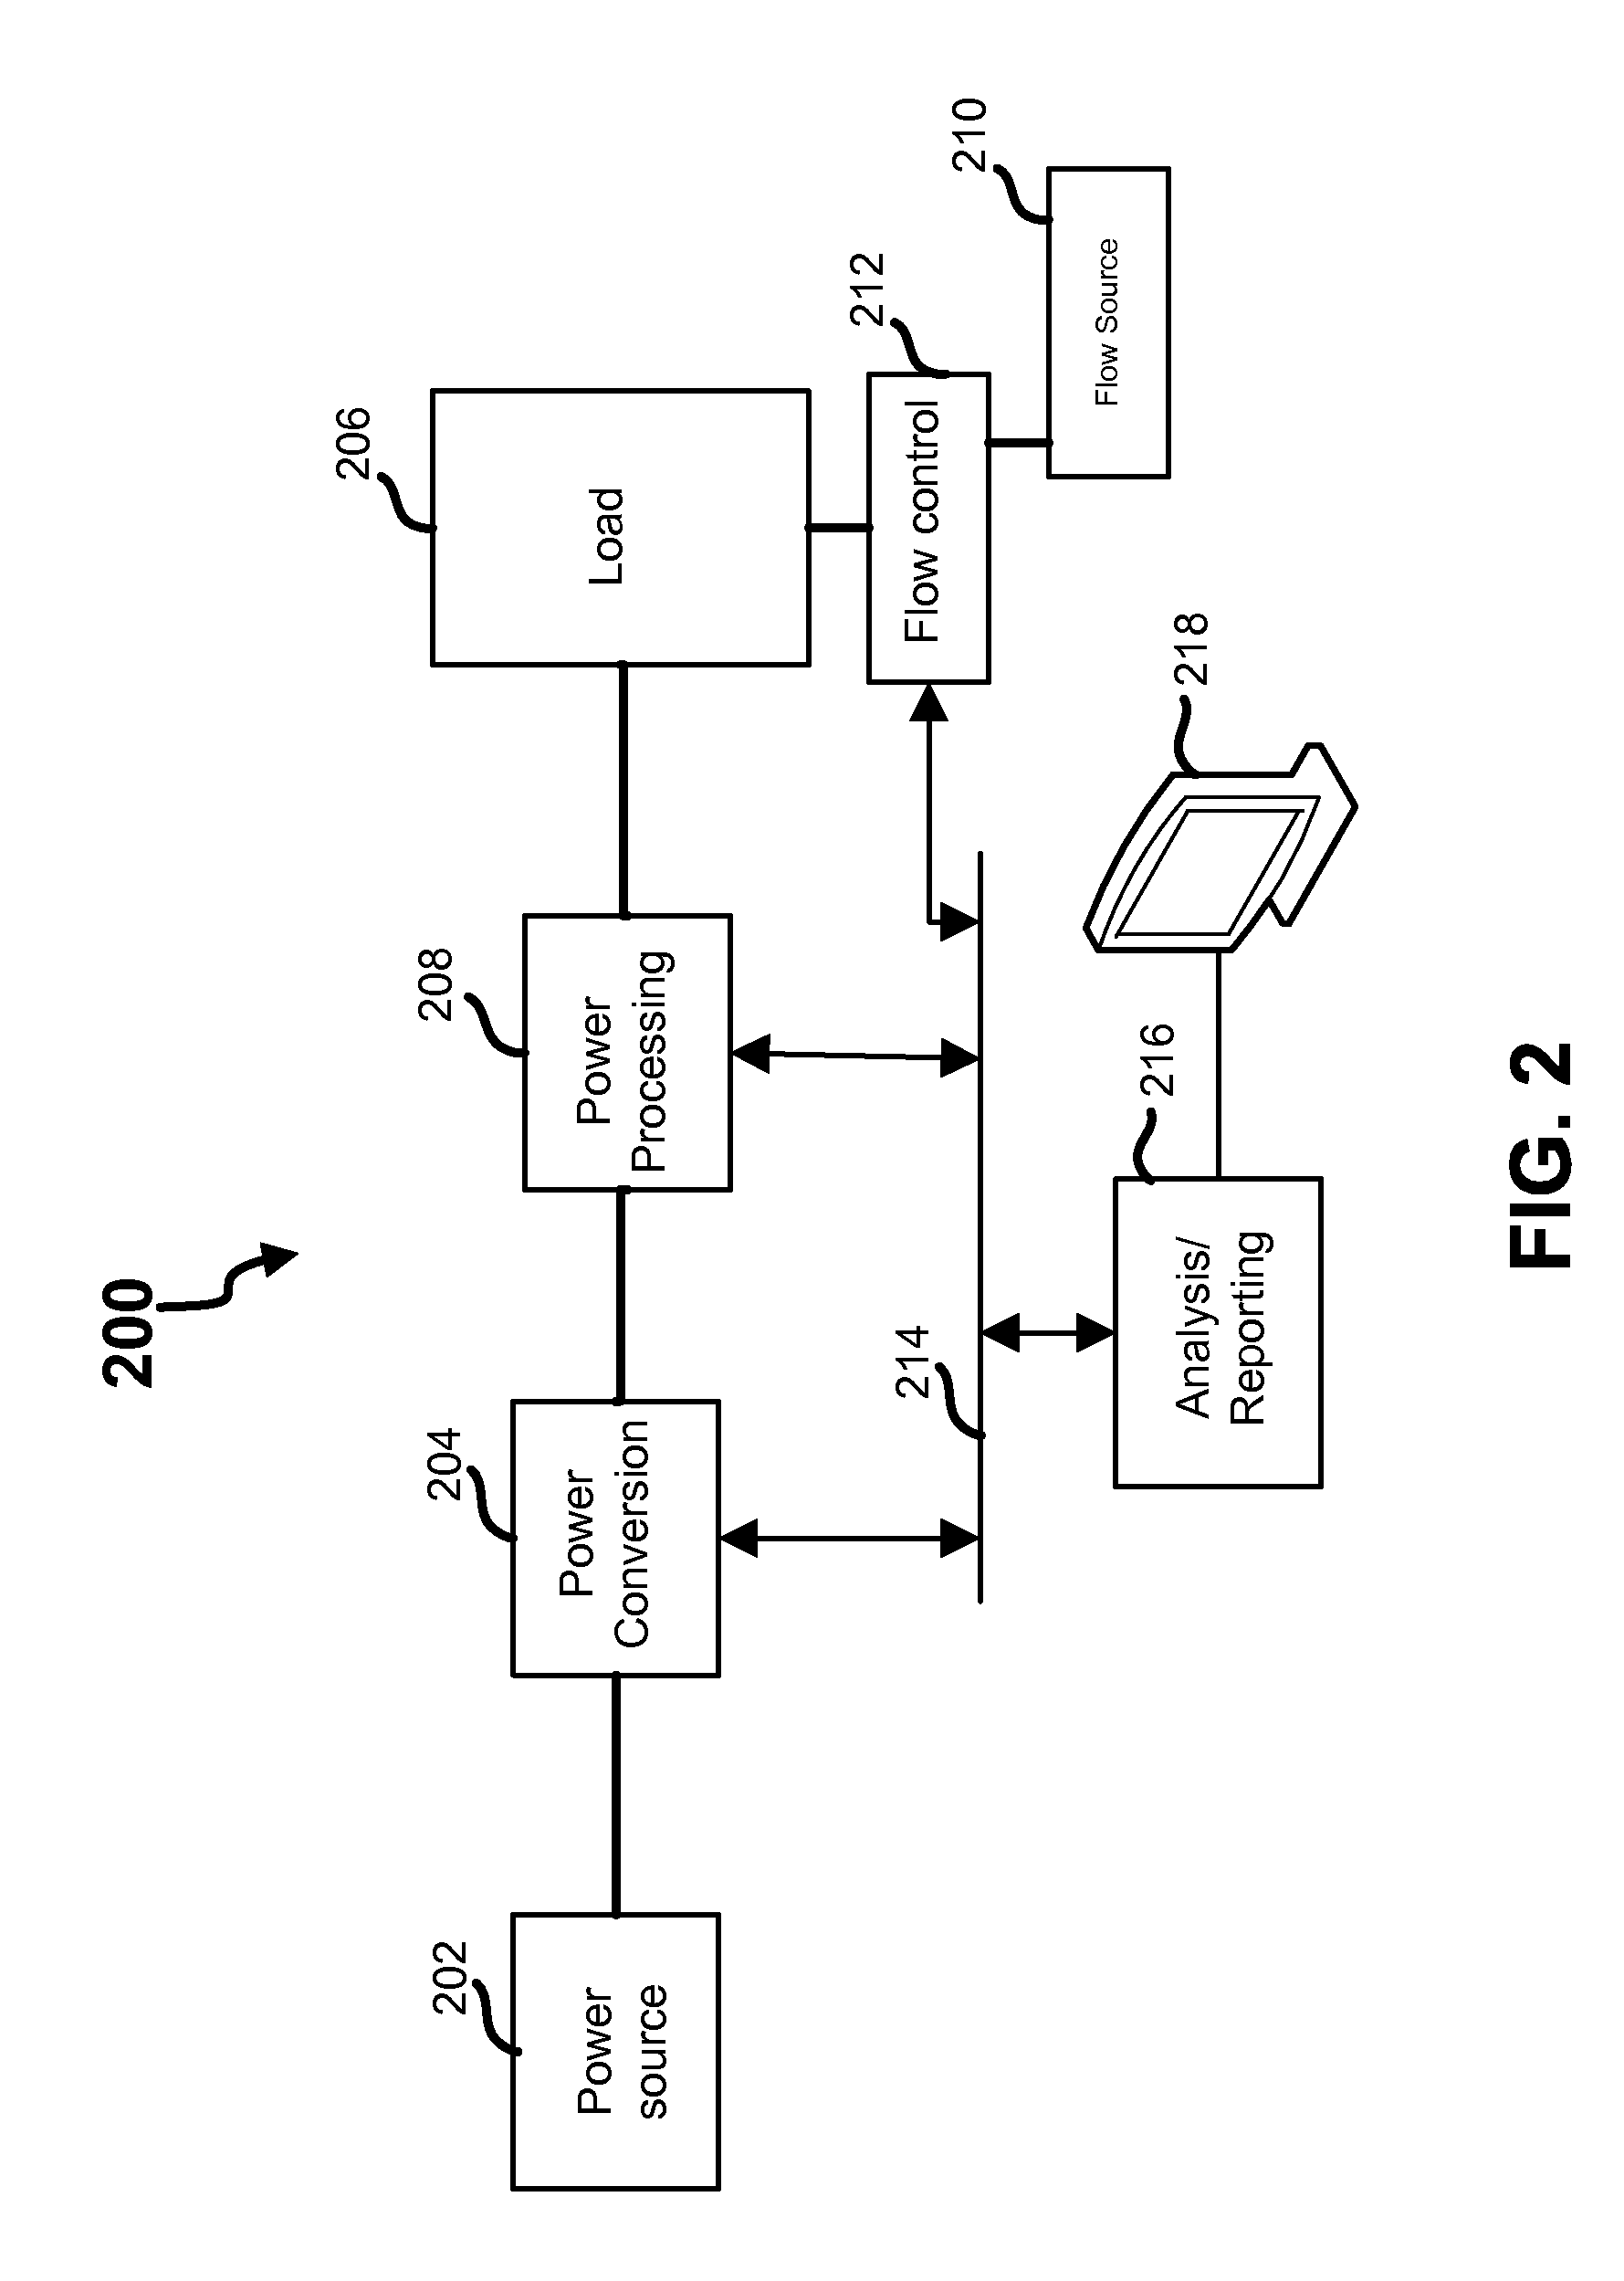 Predictive diagnostics system, apparatus, and method for improved reliability